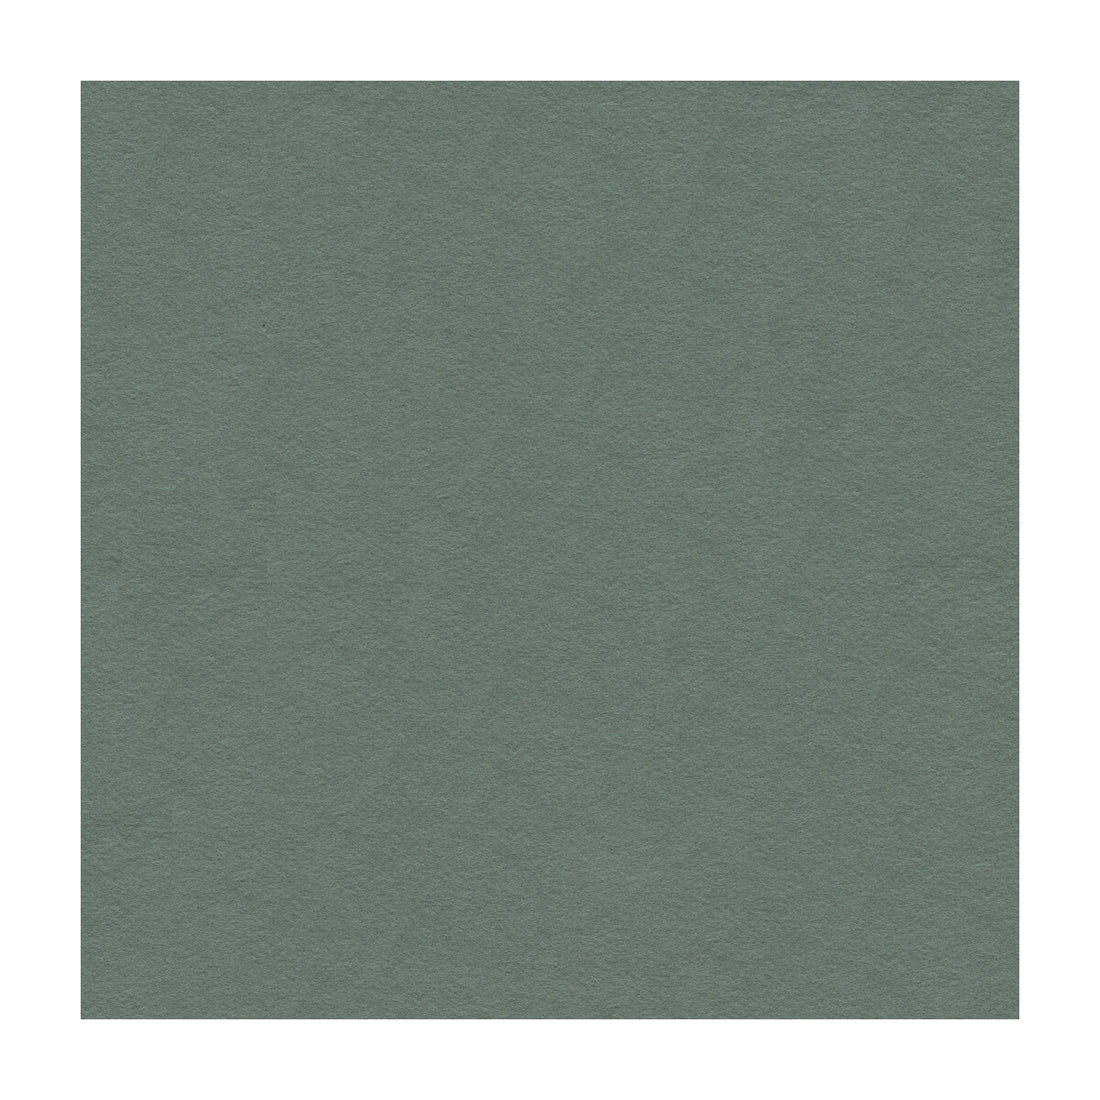 Ultrasuede Green fabric in dusk color - pattern 30787.5205.0 - by Kravet Design in the Performance collection